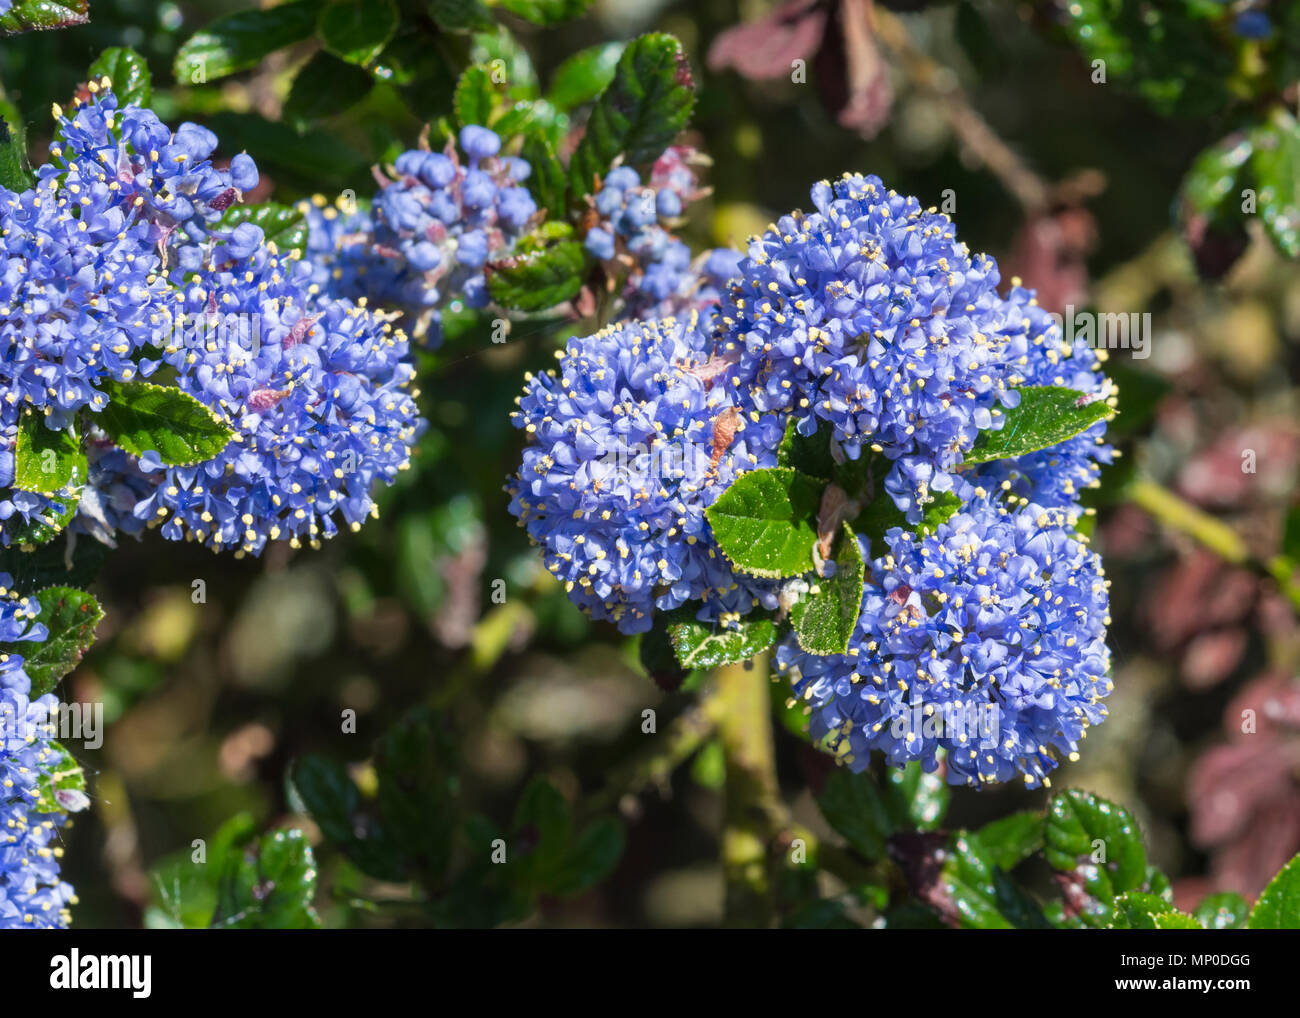 Closeup image of Californian lilac (Ceanothus), a blue flower growing in late Spring in West Sussex, England, UK. Stock Photo